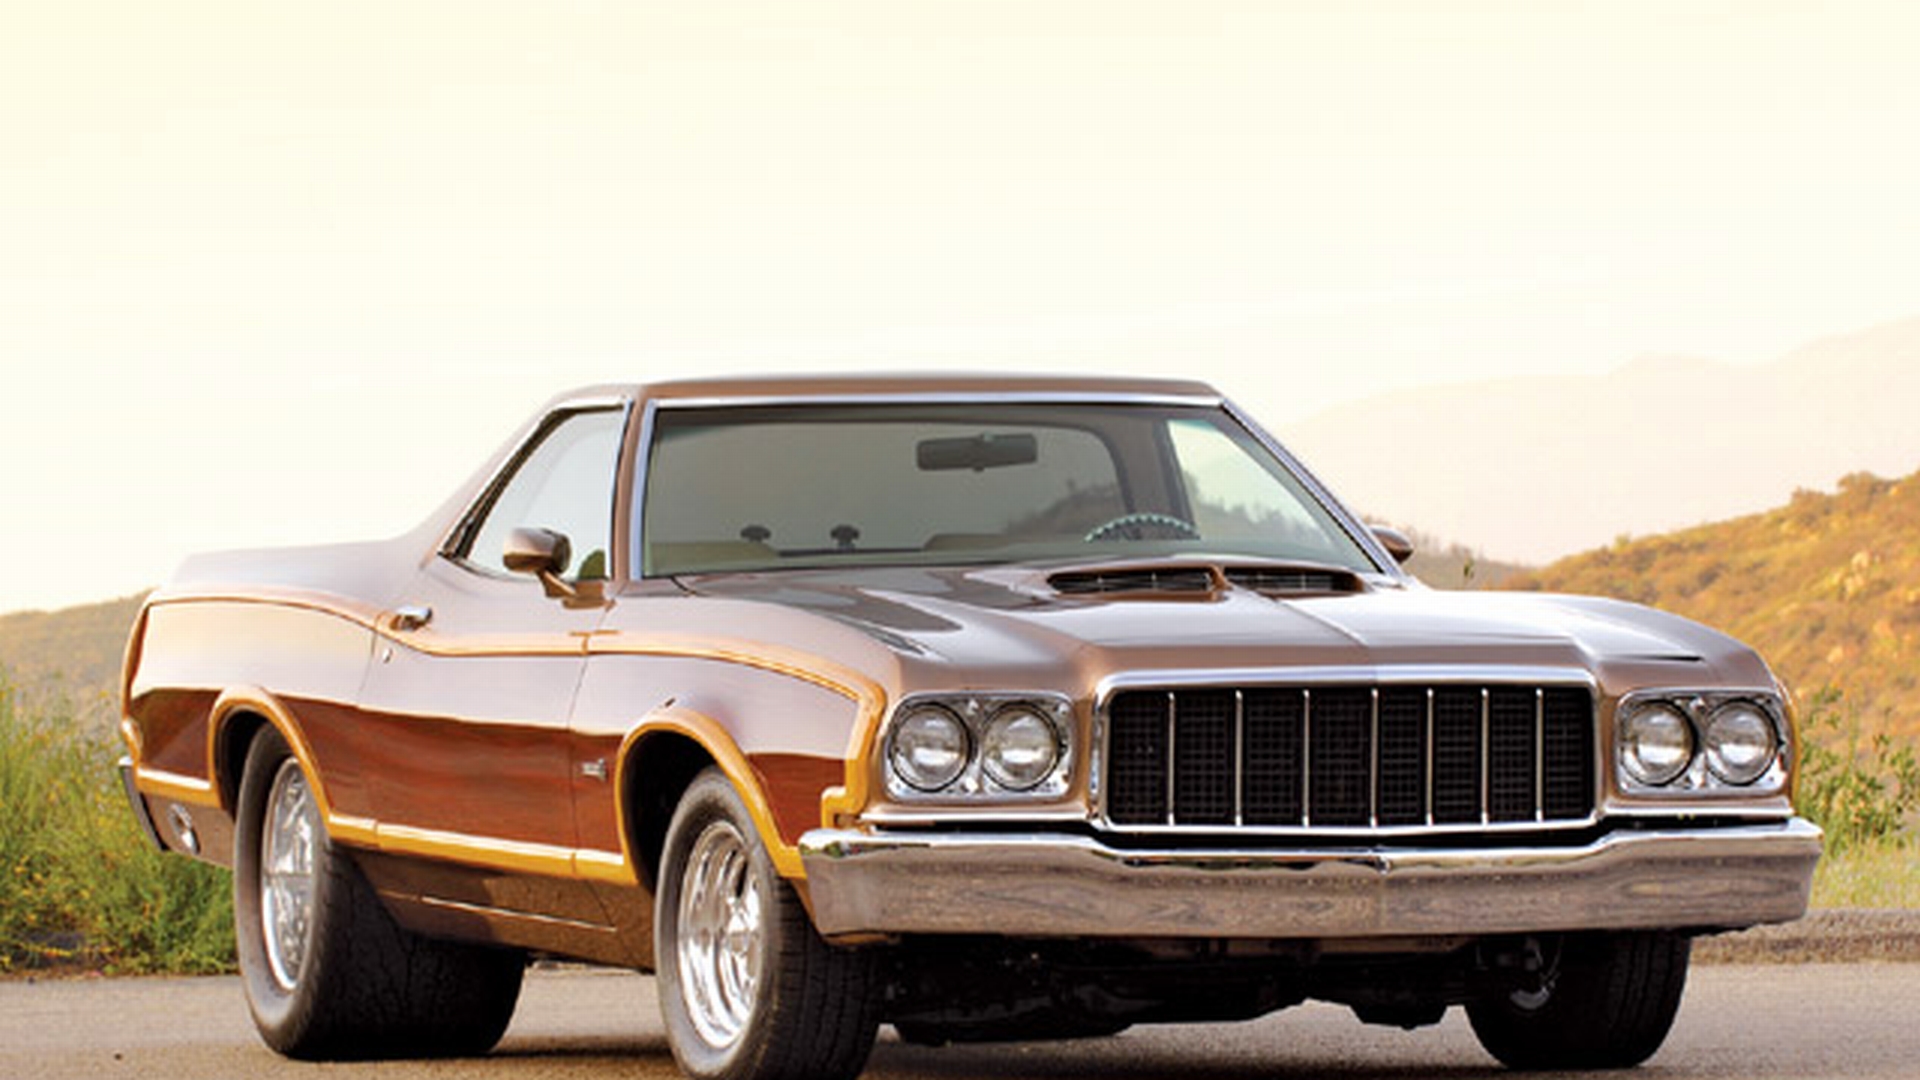 Vehicles 1975 Ford Ranchero HD Wallpaper | Background Image